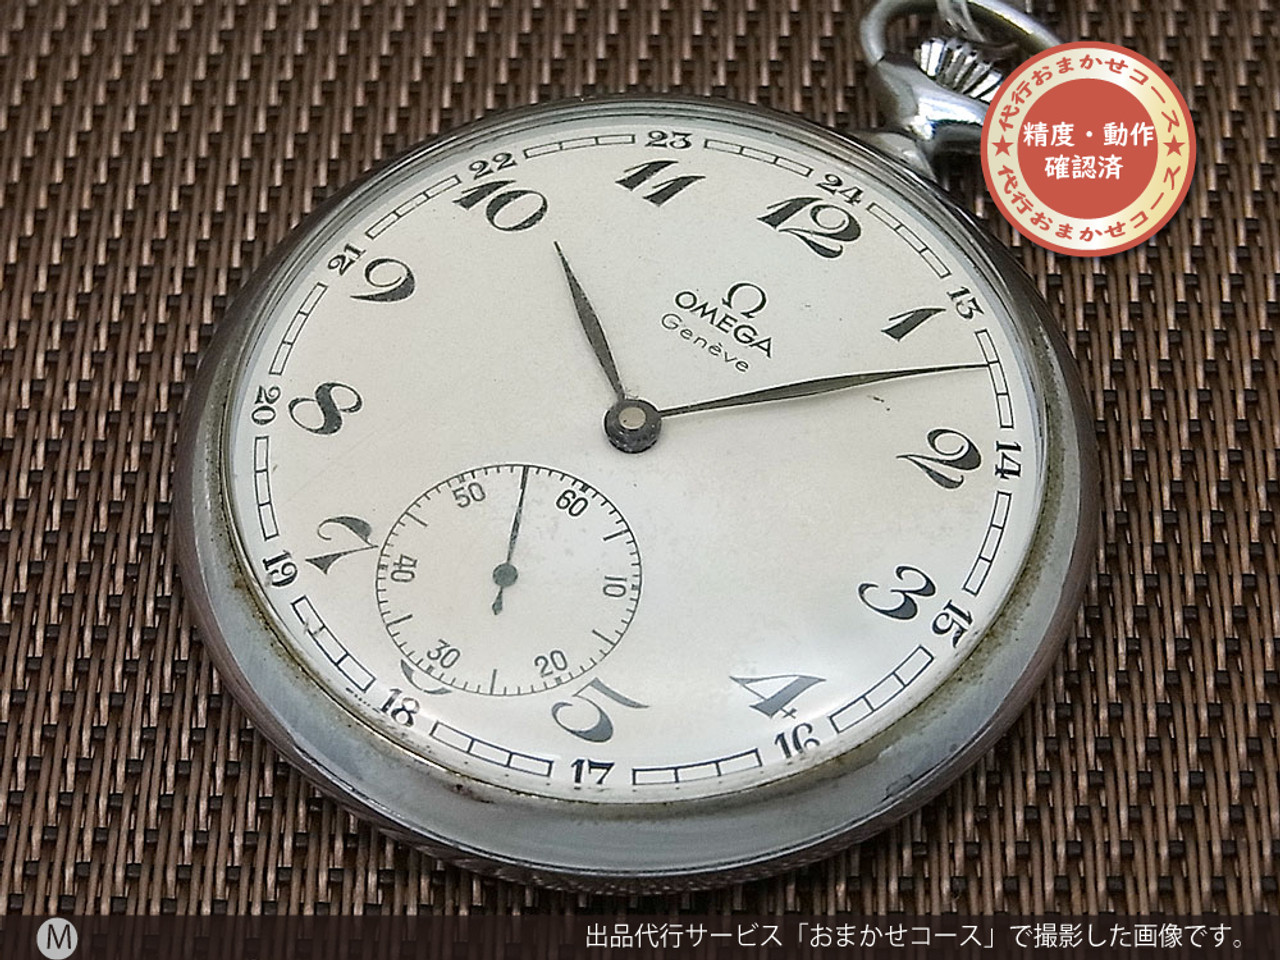 omega pocket watches for sale